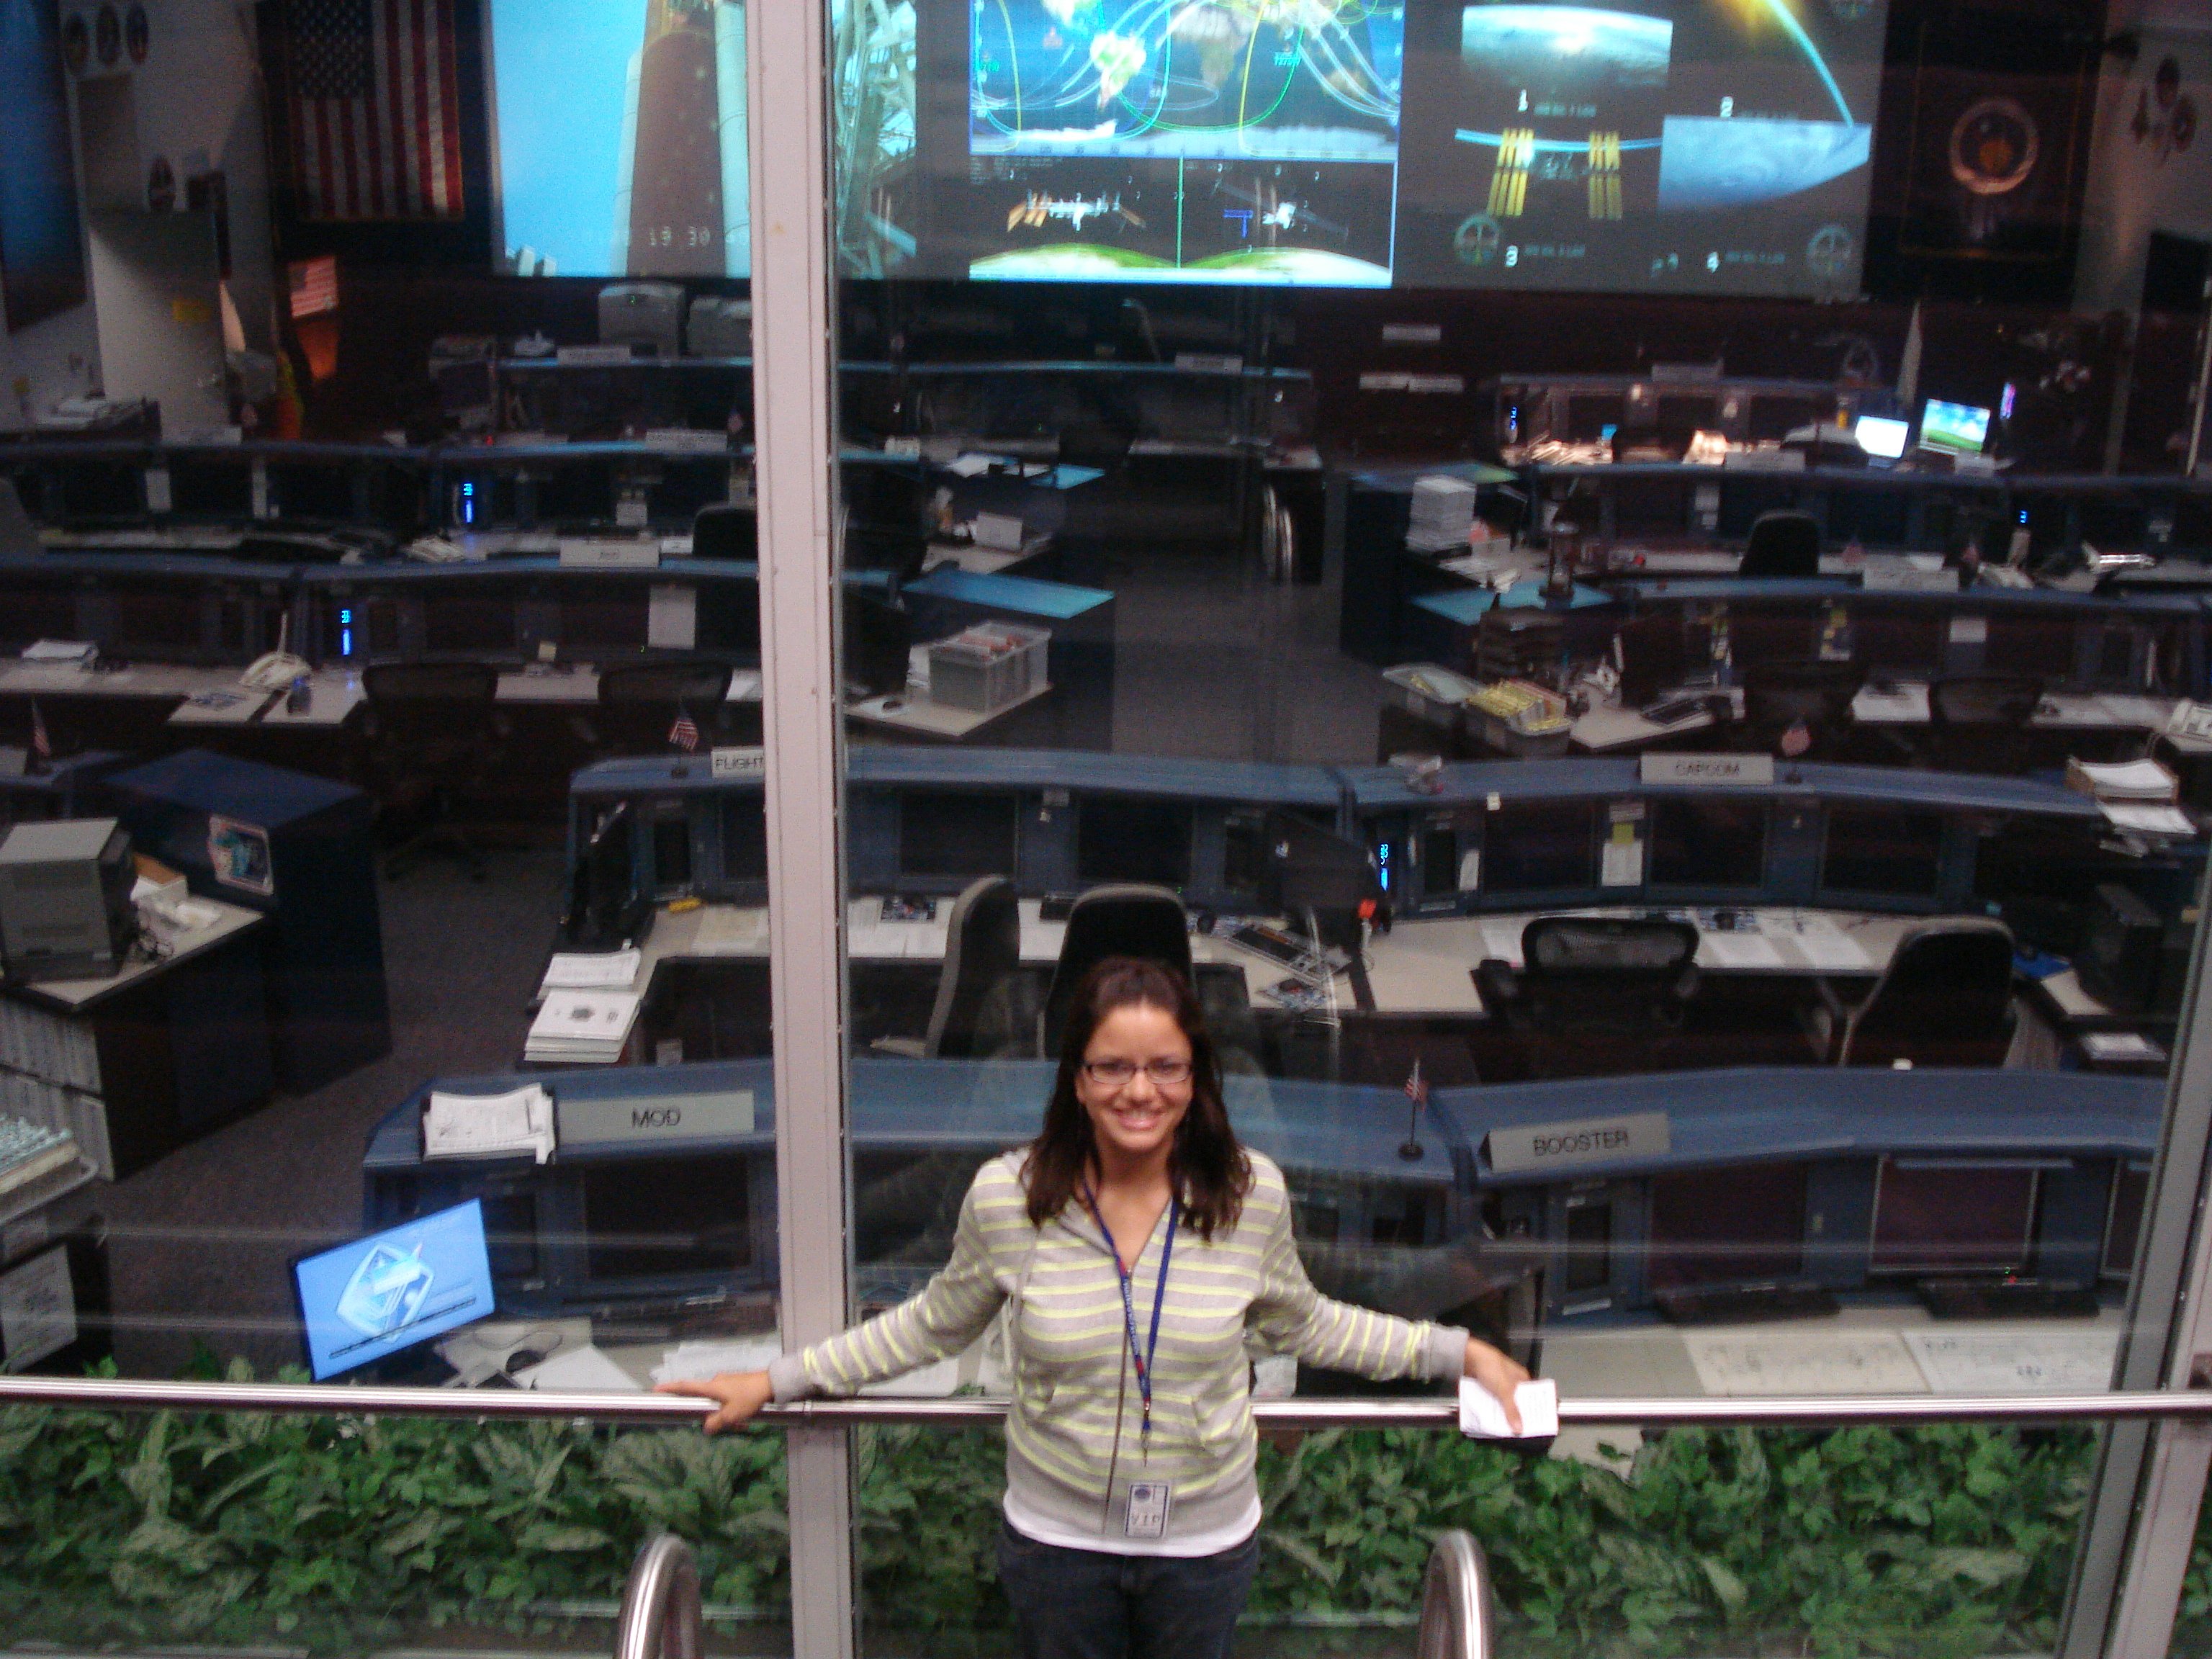 Doing research at NASA for a one-woman show.